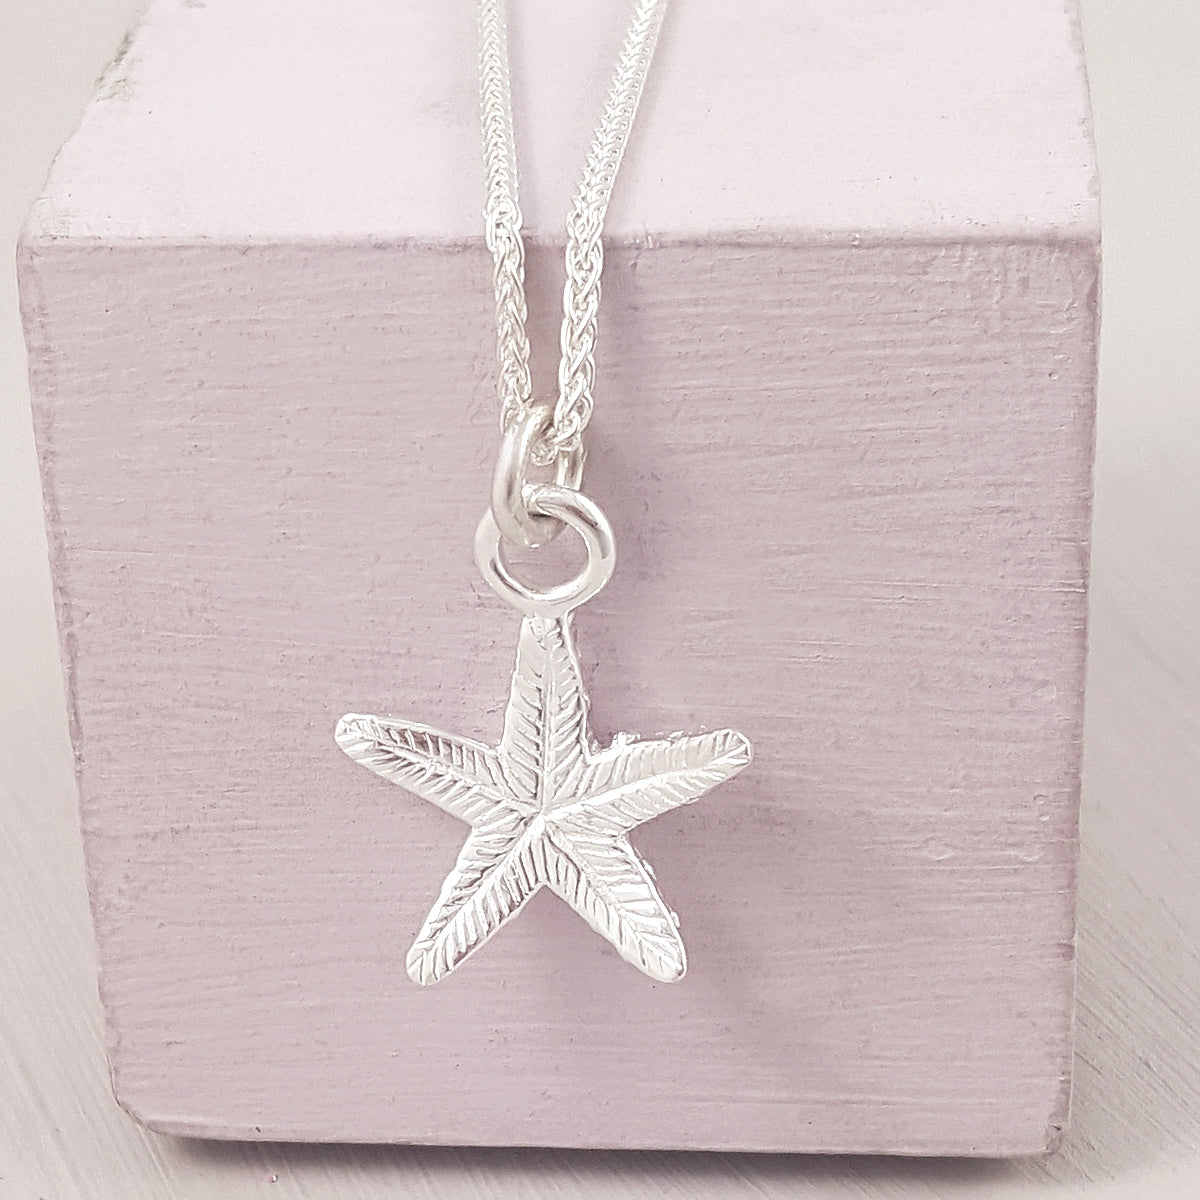 Starfish Silver Charm necklace from Scarlett Jewellery